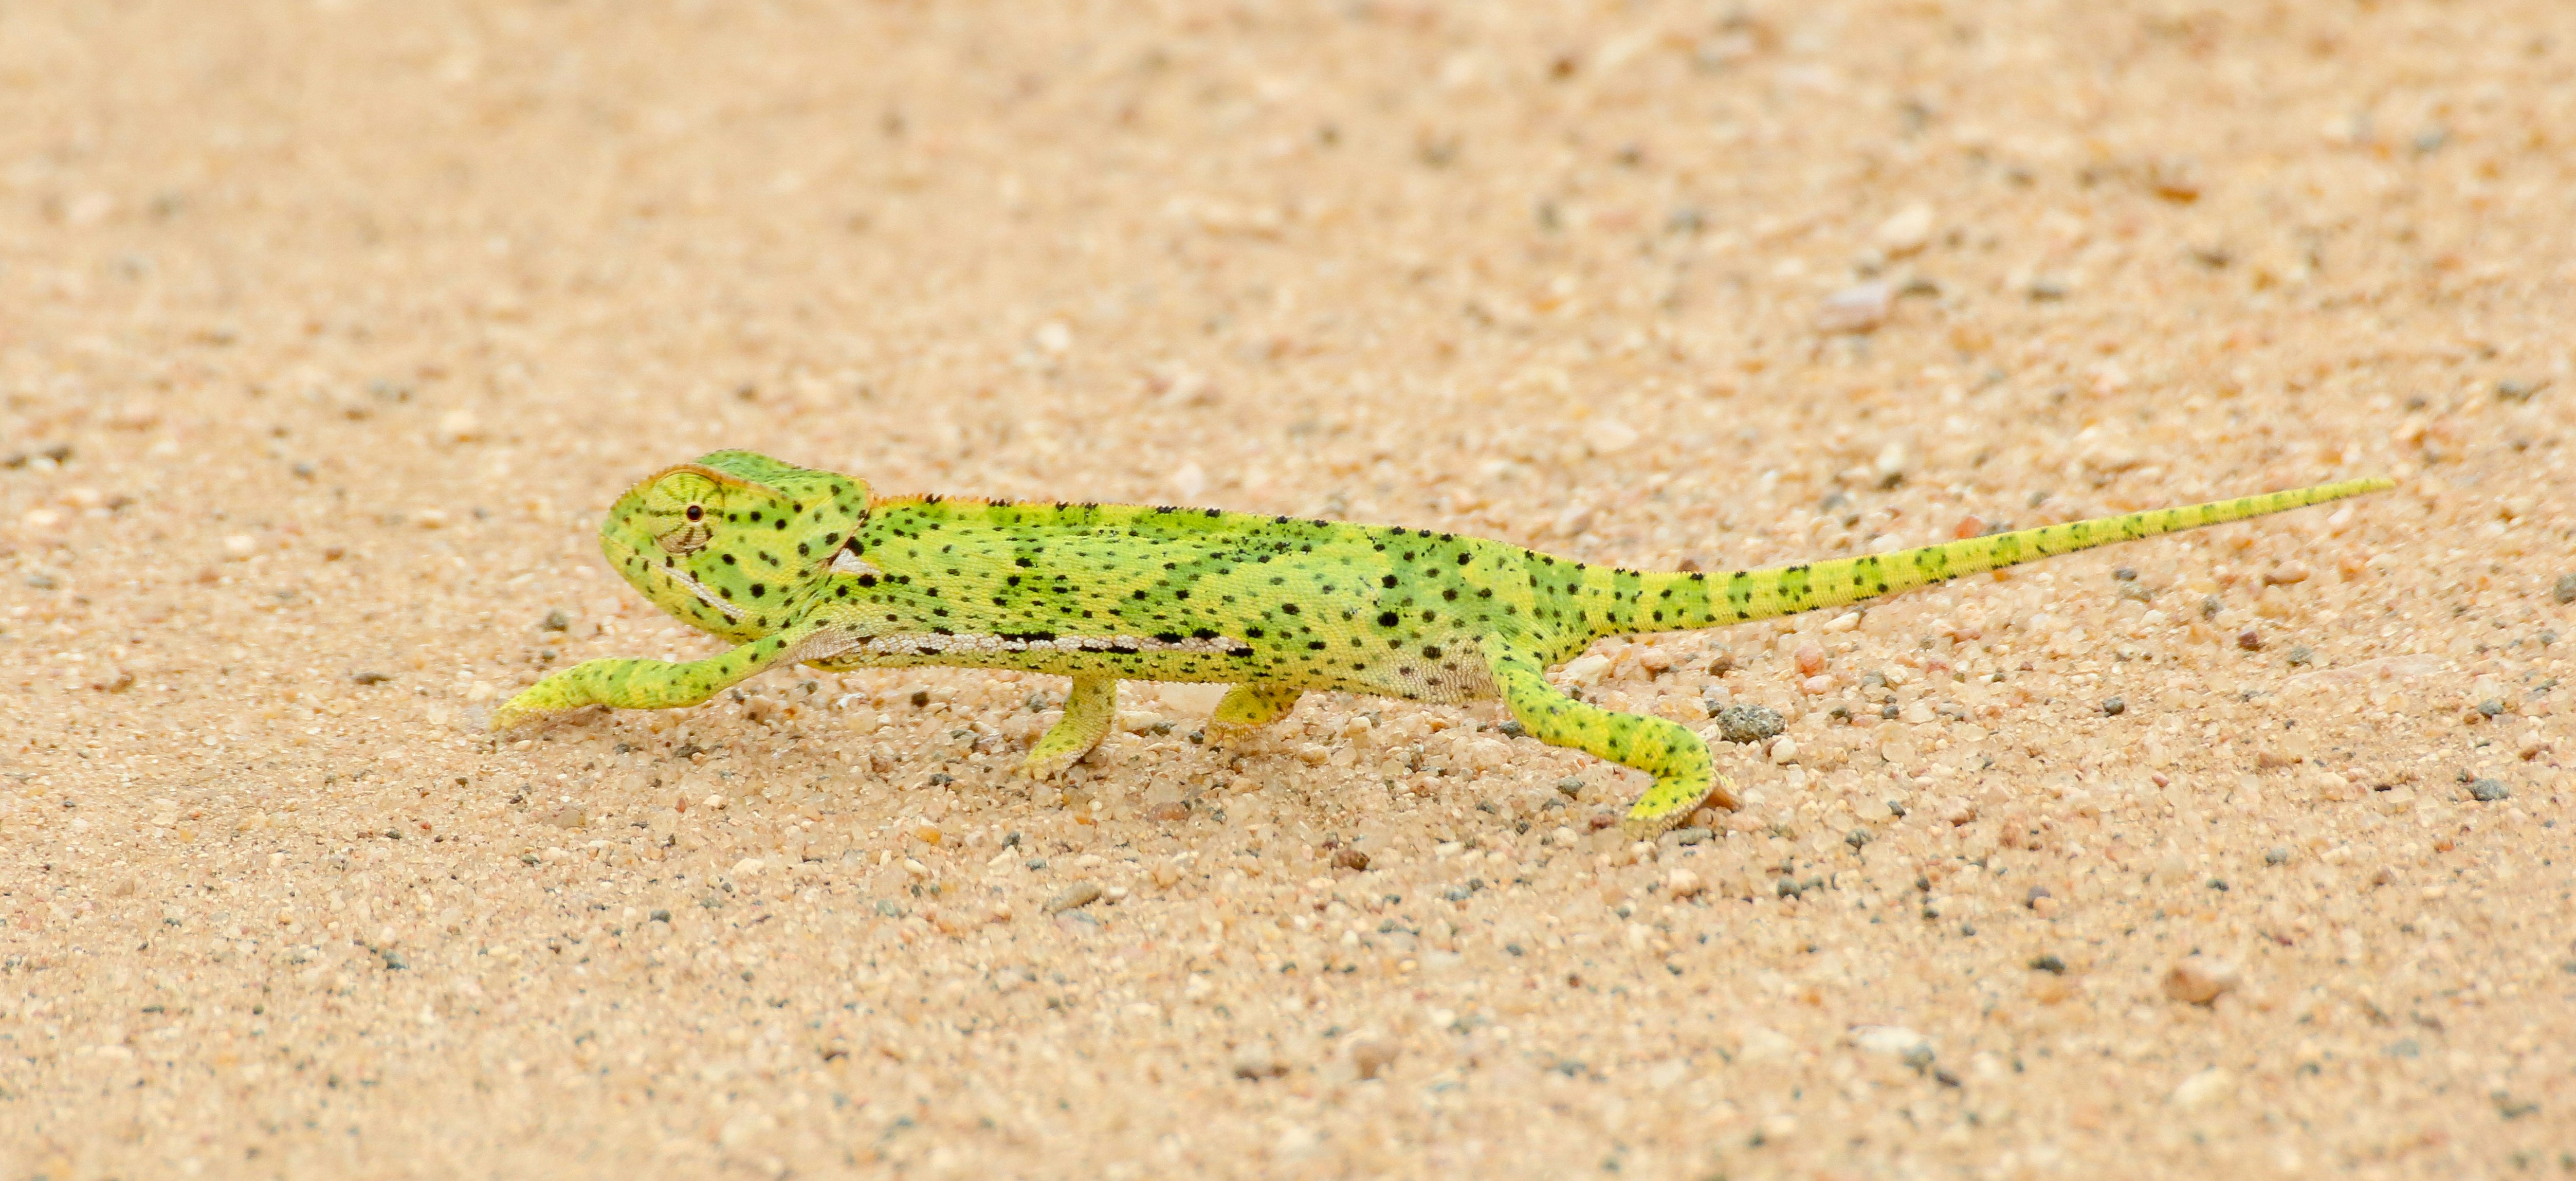 green and brown chameleon on brown sand during daytime